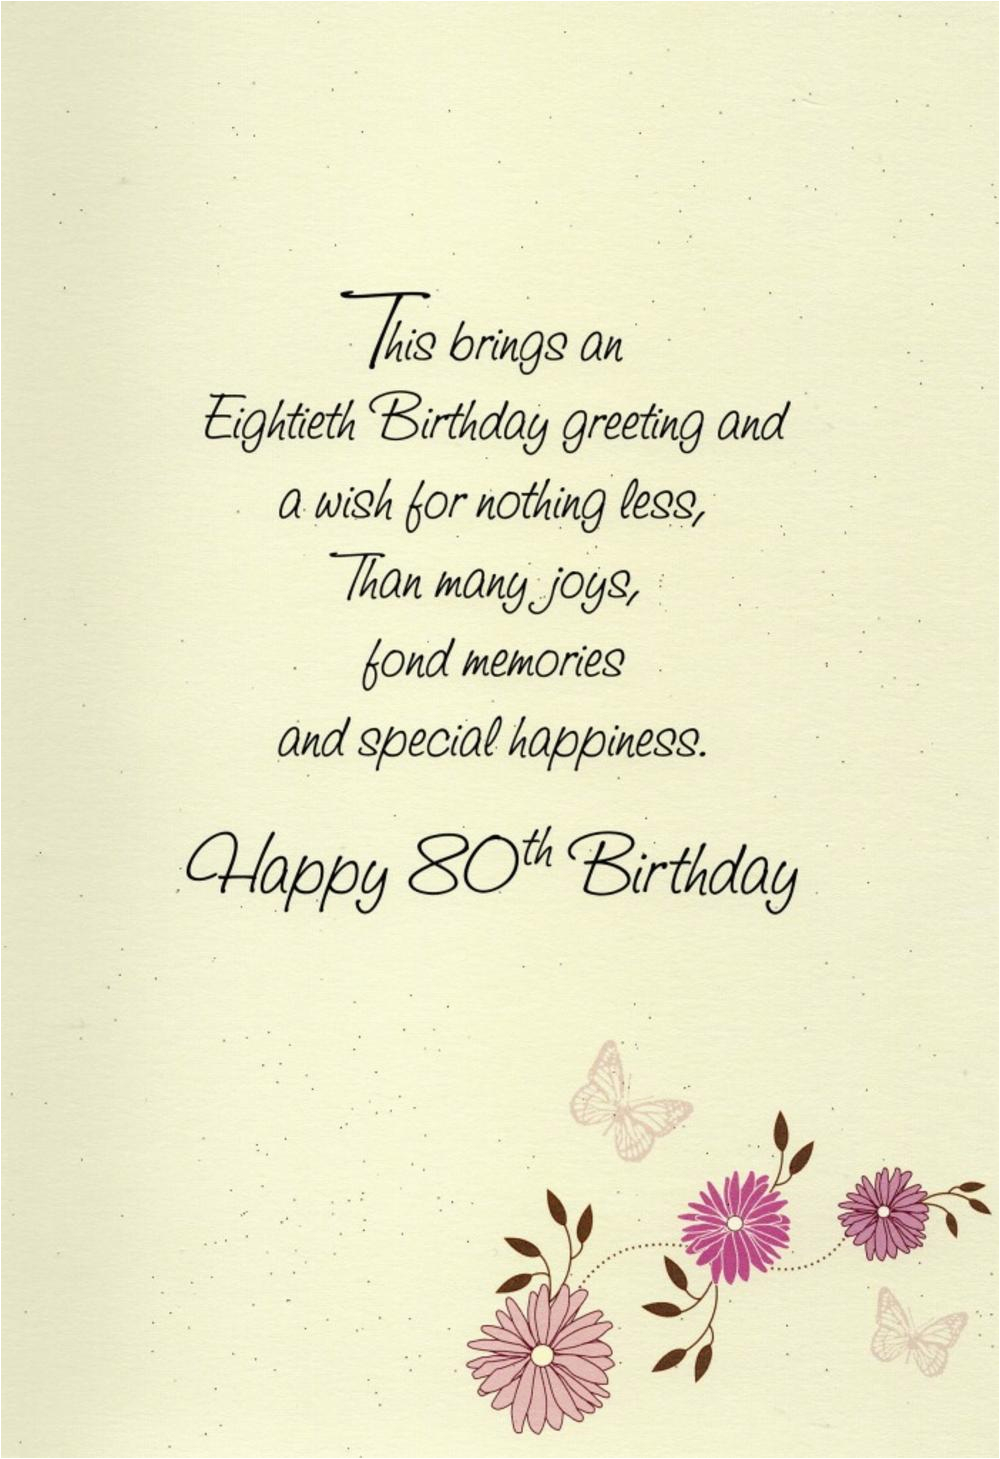 kcprfld072 happy 80th birthday greeting card lovely greetings cards nice verse